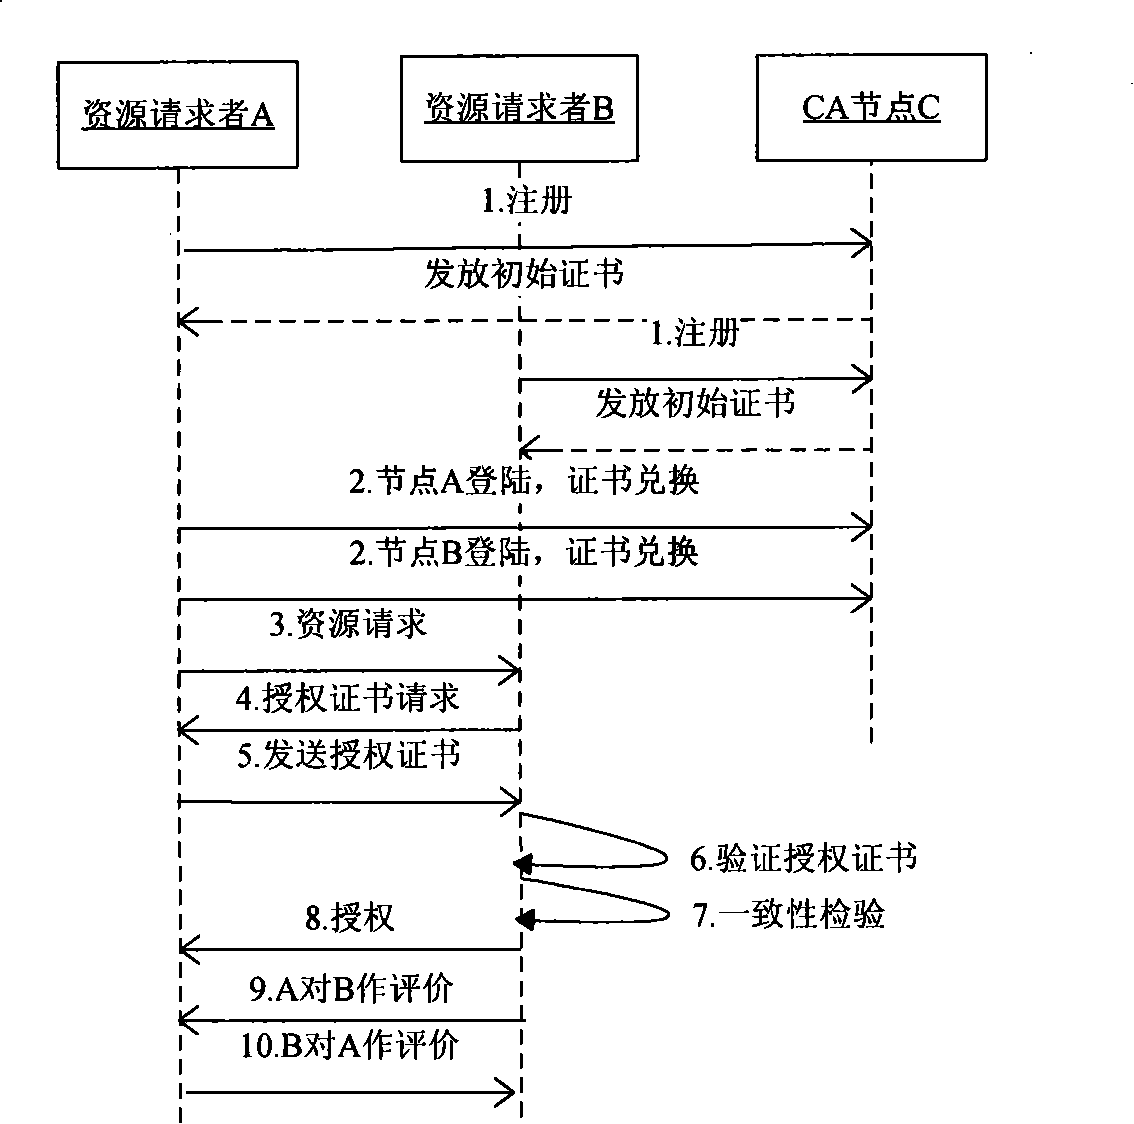 Method for evaluating and authorizing peer-to-peer network node by certificate